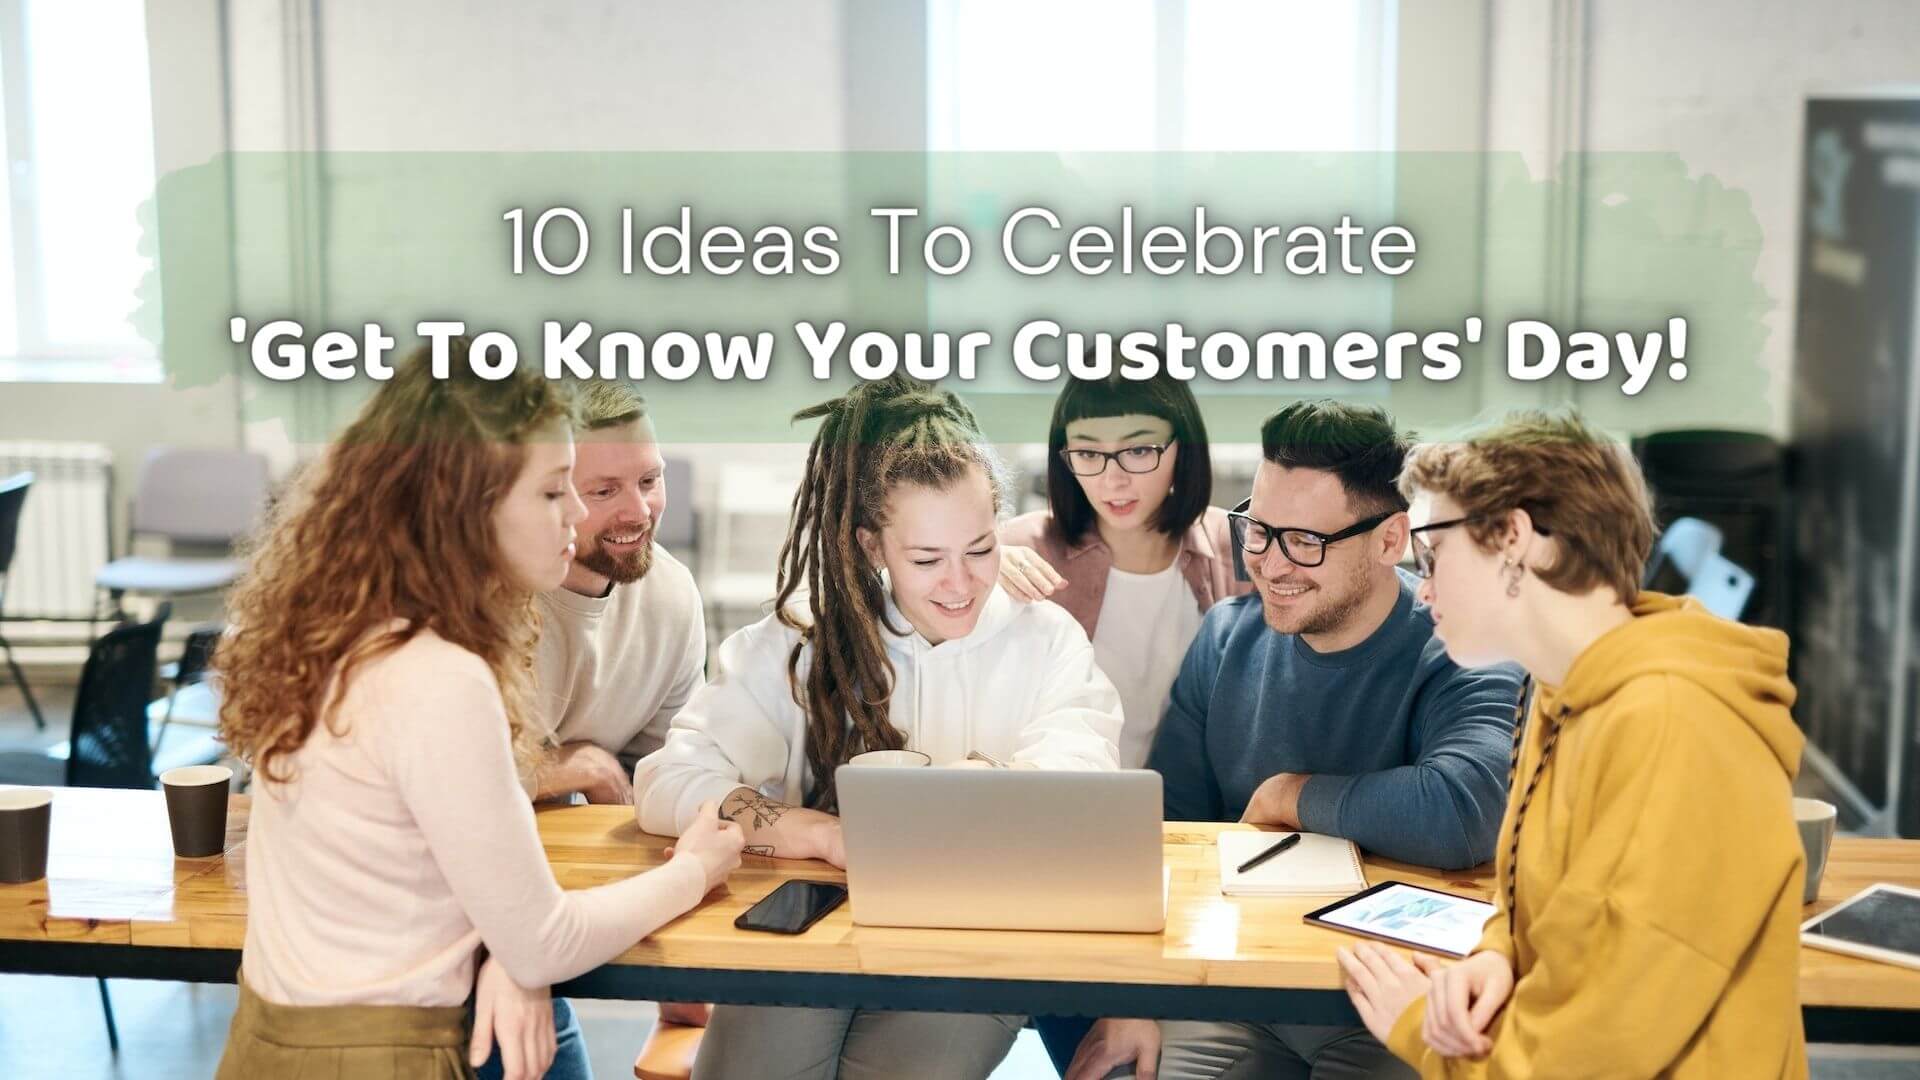 Do you want to show your customers how much you appreciate their business? Here are ten neat ideas to celebrate Get to Know Your Customers Day.